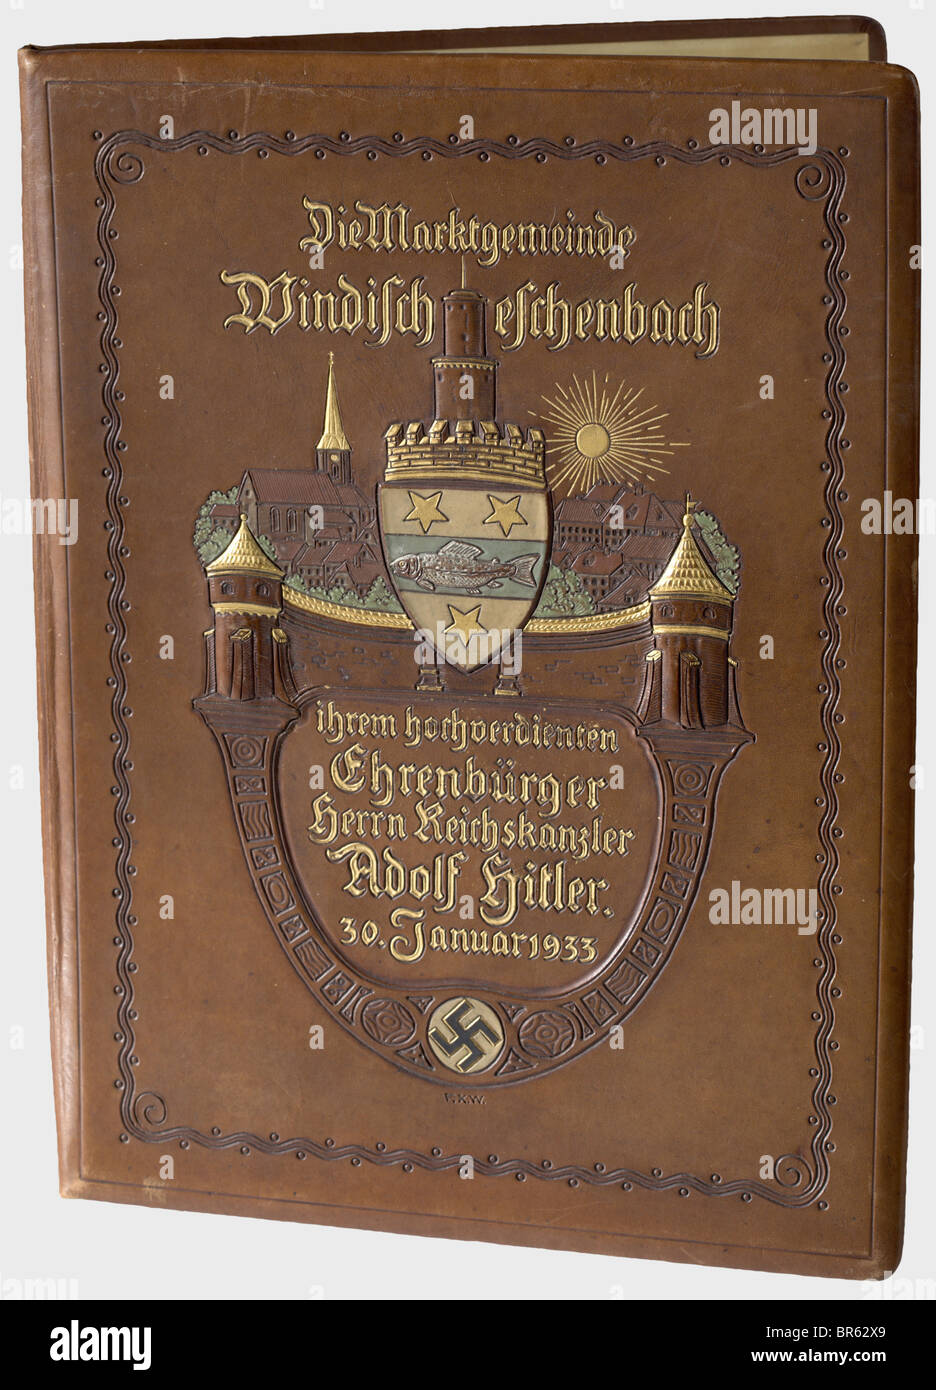 Adolf Hitler - a certificate of honorary citizenship, and naming of the main square in 'Adolf Hitler Platz' to honour the Reich Chancellor Adolf Hitler, by the municipality of Windischeschenbach (Bavarian Ostmark), dated 23 May 1933. Designed in fine hand-painting with a depiction of the village, Bavarian coat of arms and swastika. Calligraphic text. In a gold-stamped leather folder with city coat of arms. Dimensions 40 x 30 cm. Today the town is known especially for the Eschenbach porcelain and the continental deep drilling to a depth of nearly 10.000 m. histo, Stock Photo